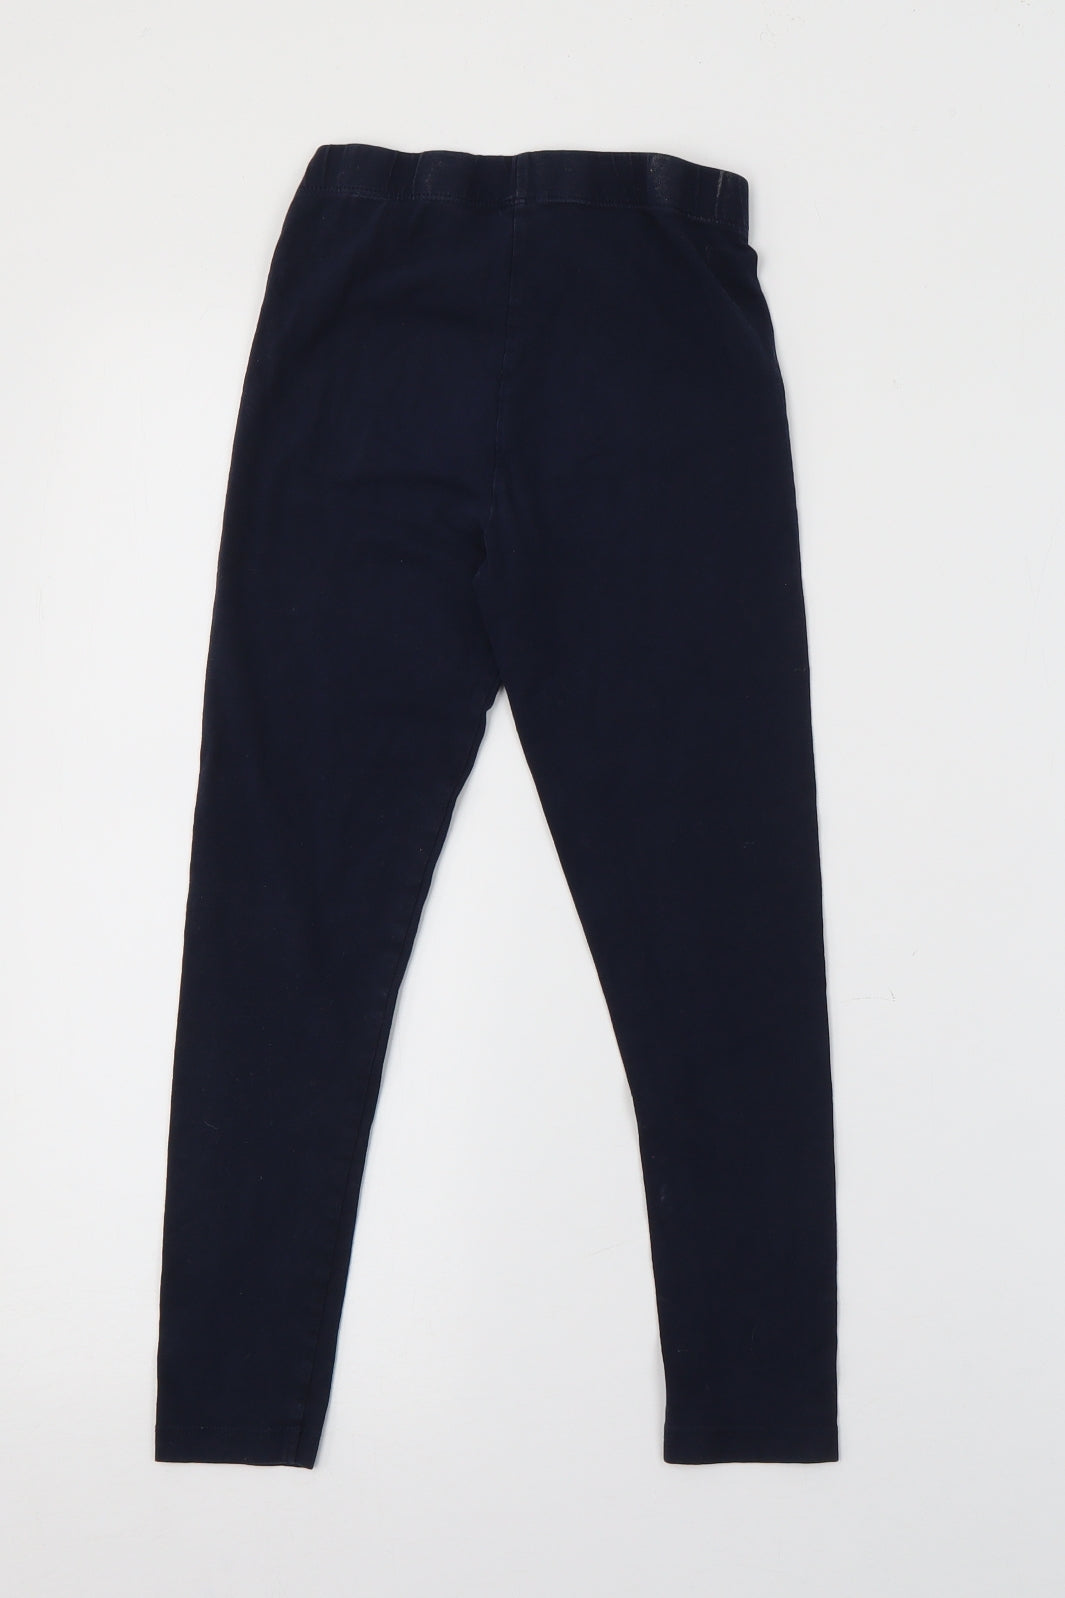 Dunnes Stores Girls Blue  Cotton Pedal Pusher Trousers Size 7-8 Years  Regular